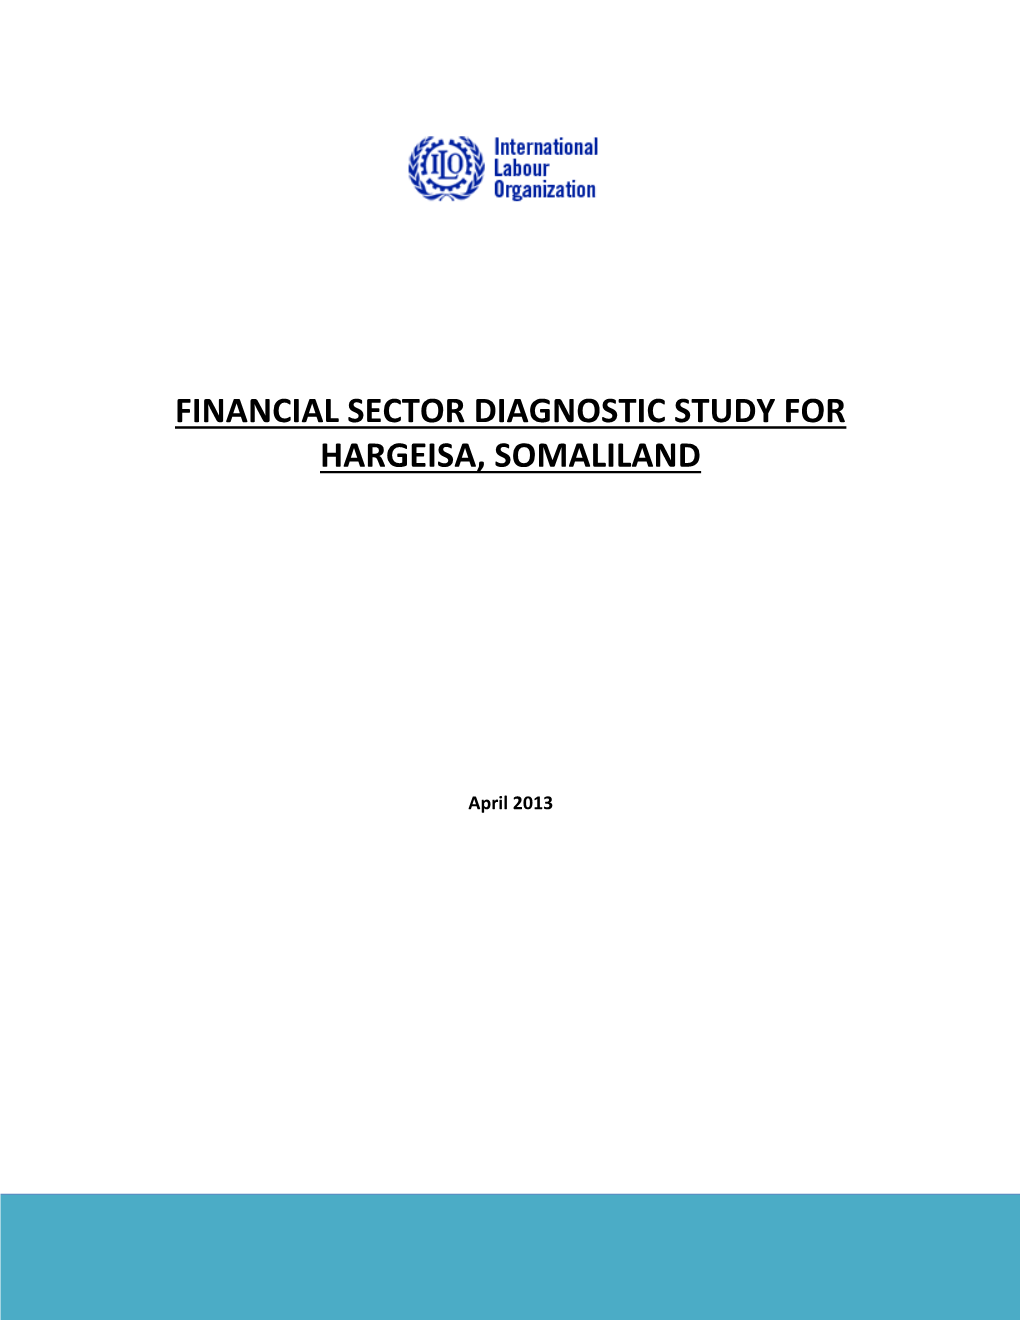 Financial Sector Diagnostic Study for Hargeisa, Somaliland